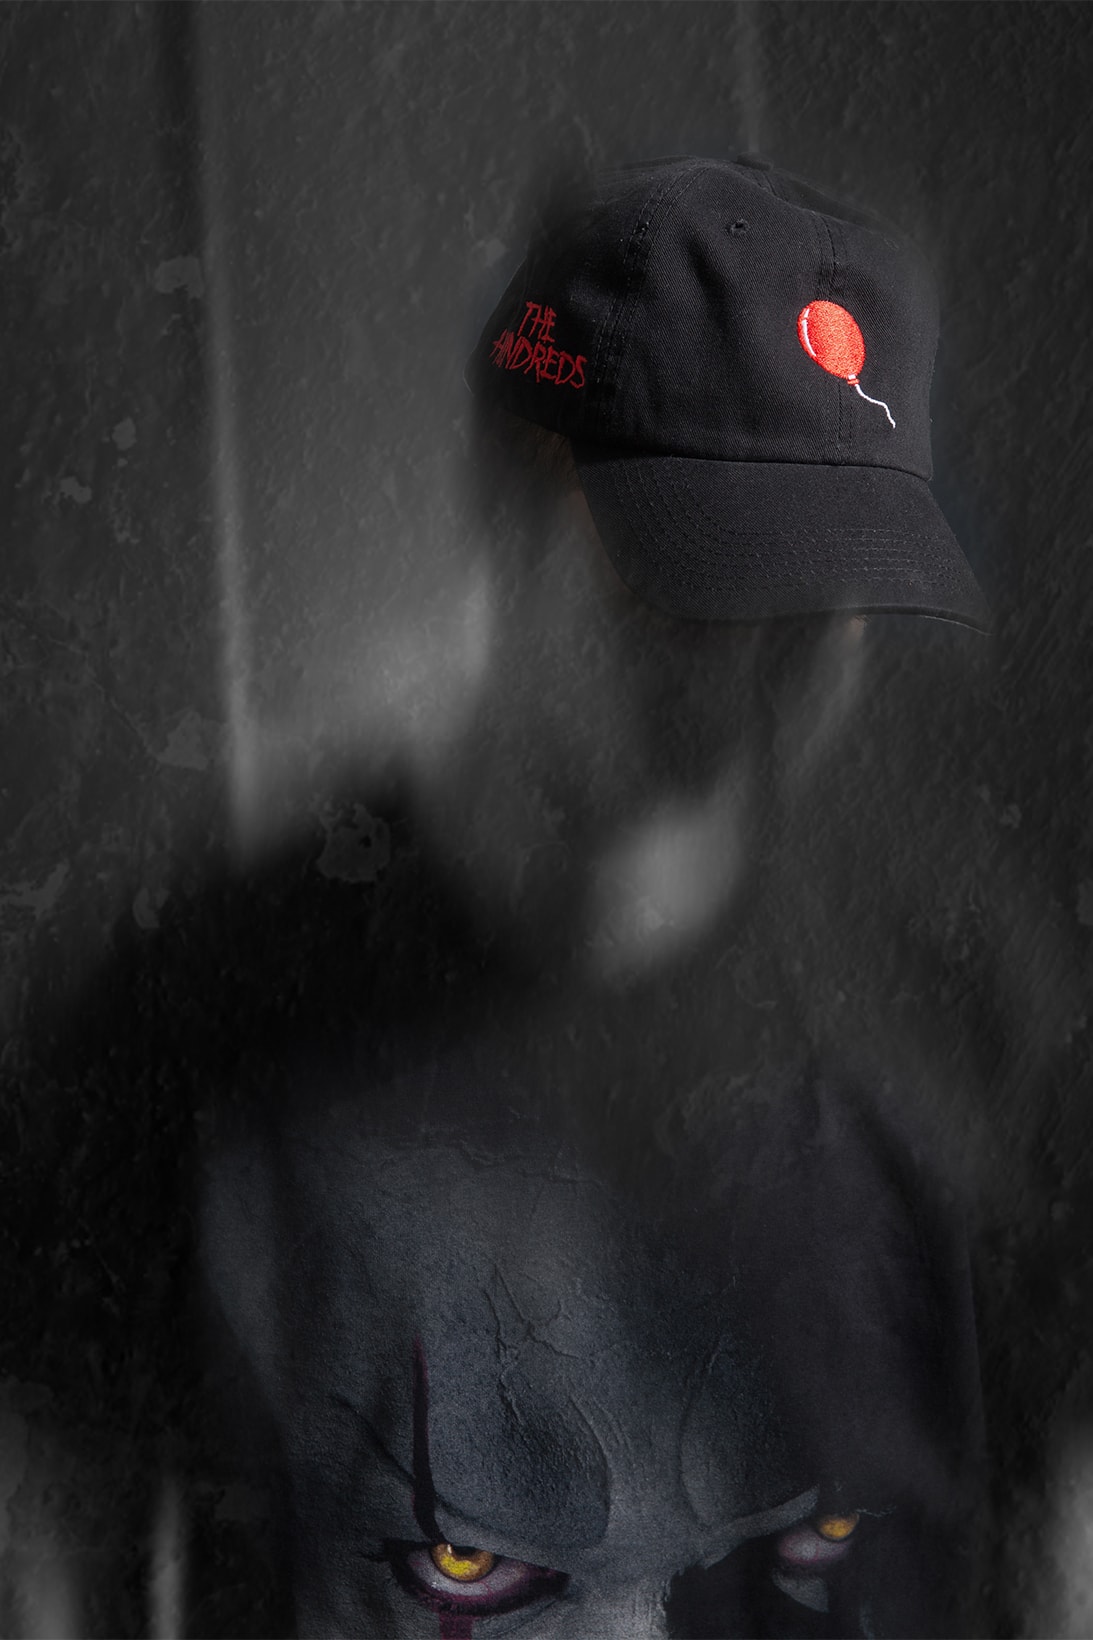 IT The Hundreds Capsule Collection Pennywise Stephen King 2017 December 14 Release Date Info Collaboration Pennywise Clown